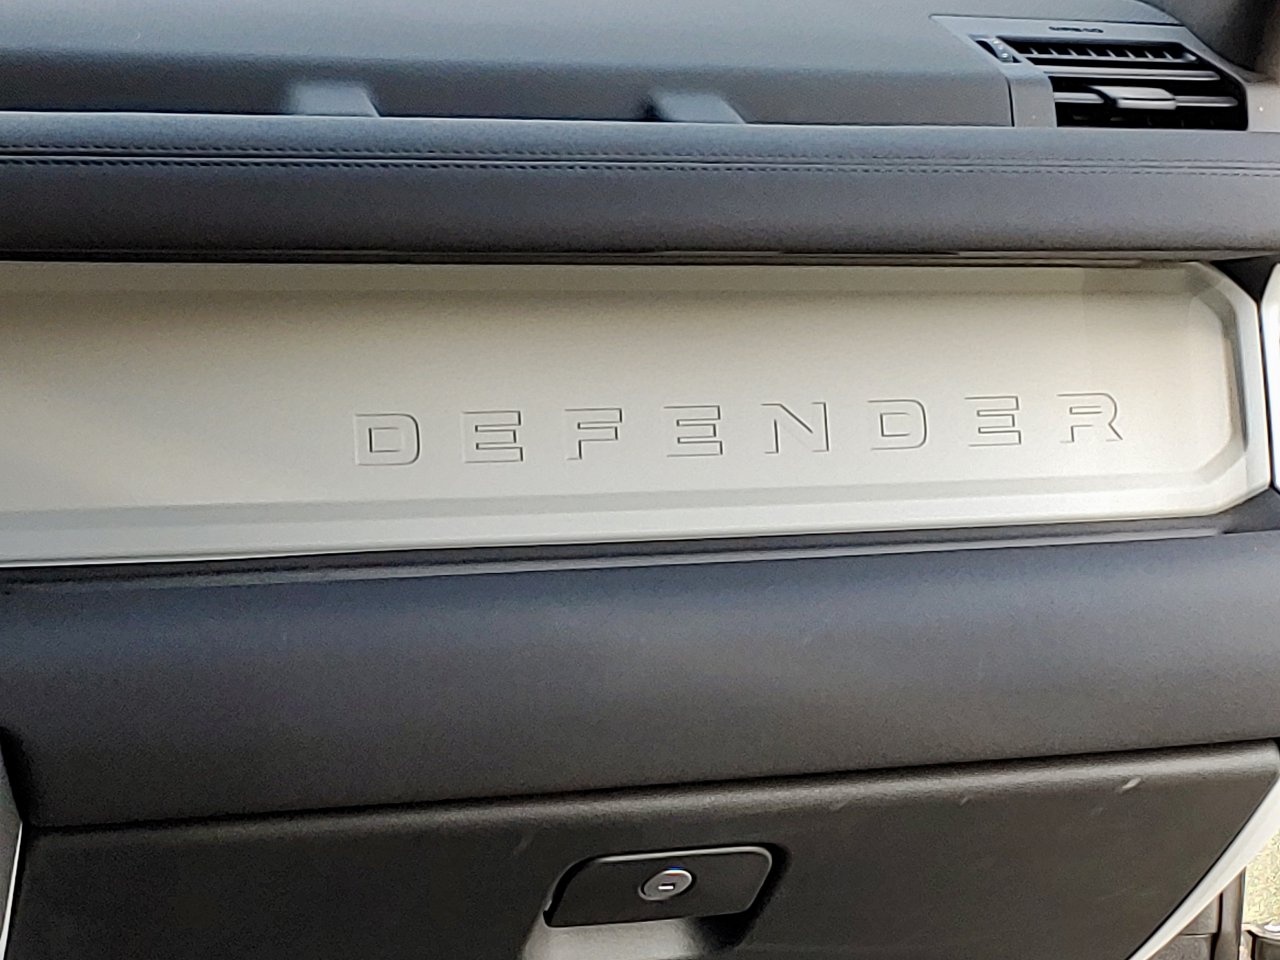 Defender, Defender 90 is the new champion among SUVs, ClassicCars.com Journal